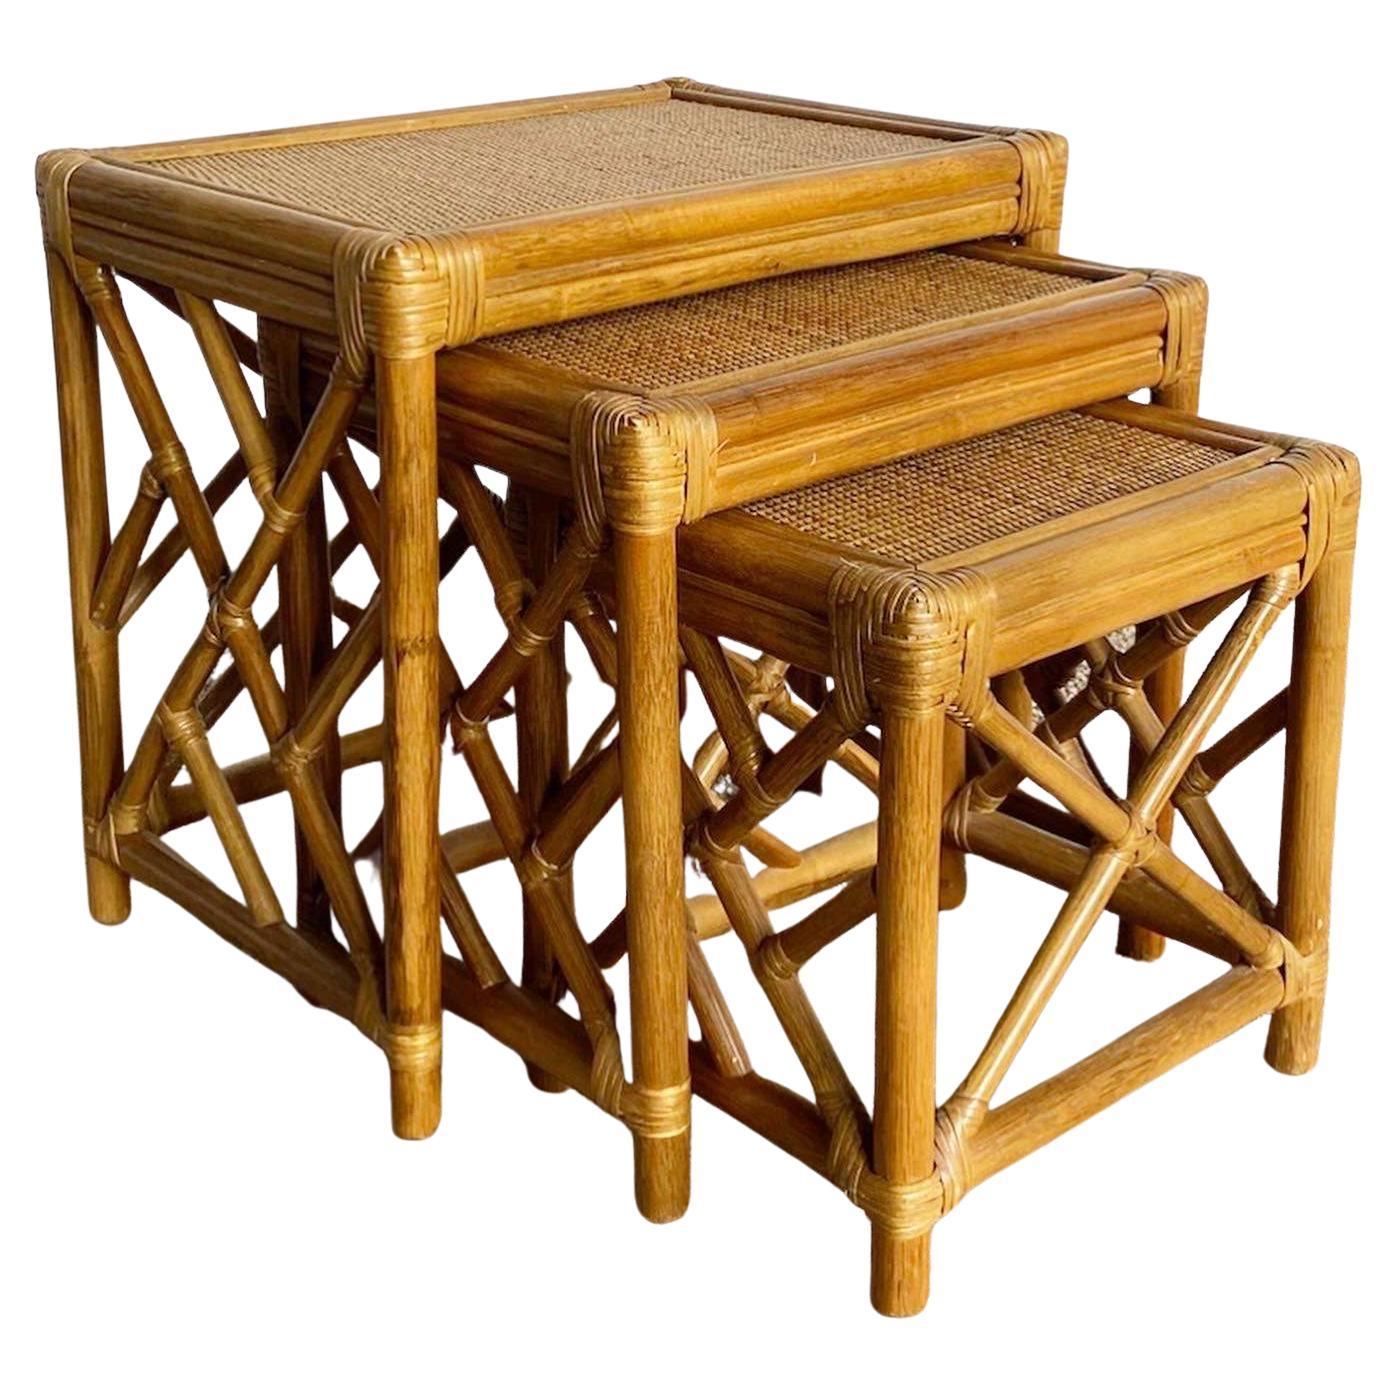 Boho Chic Chippendale Bamboo Rattan and Wicker Nesting Tables - Set of 3 For Sale